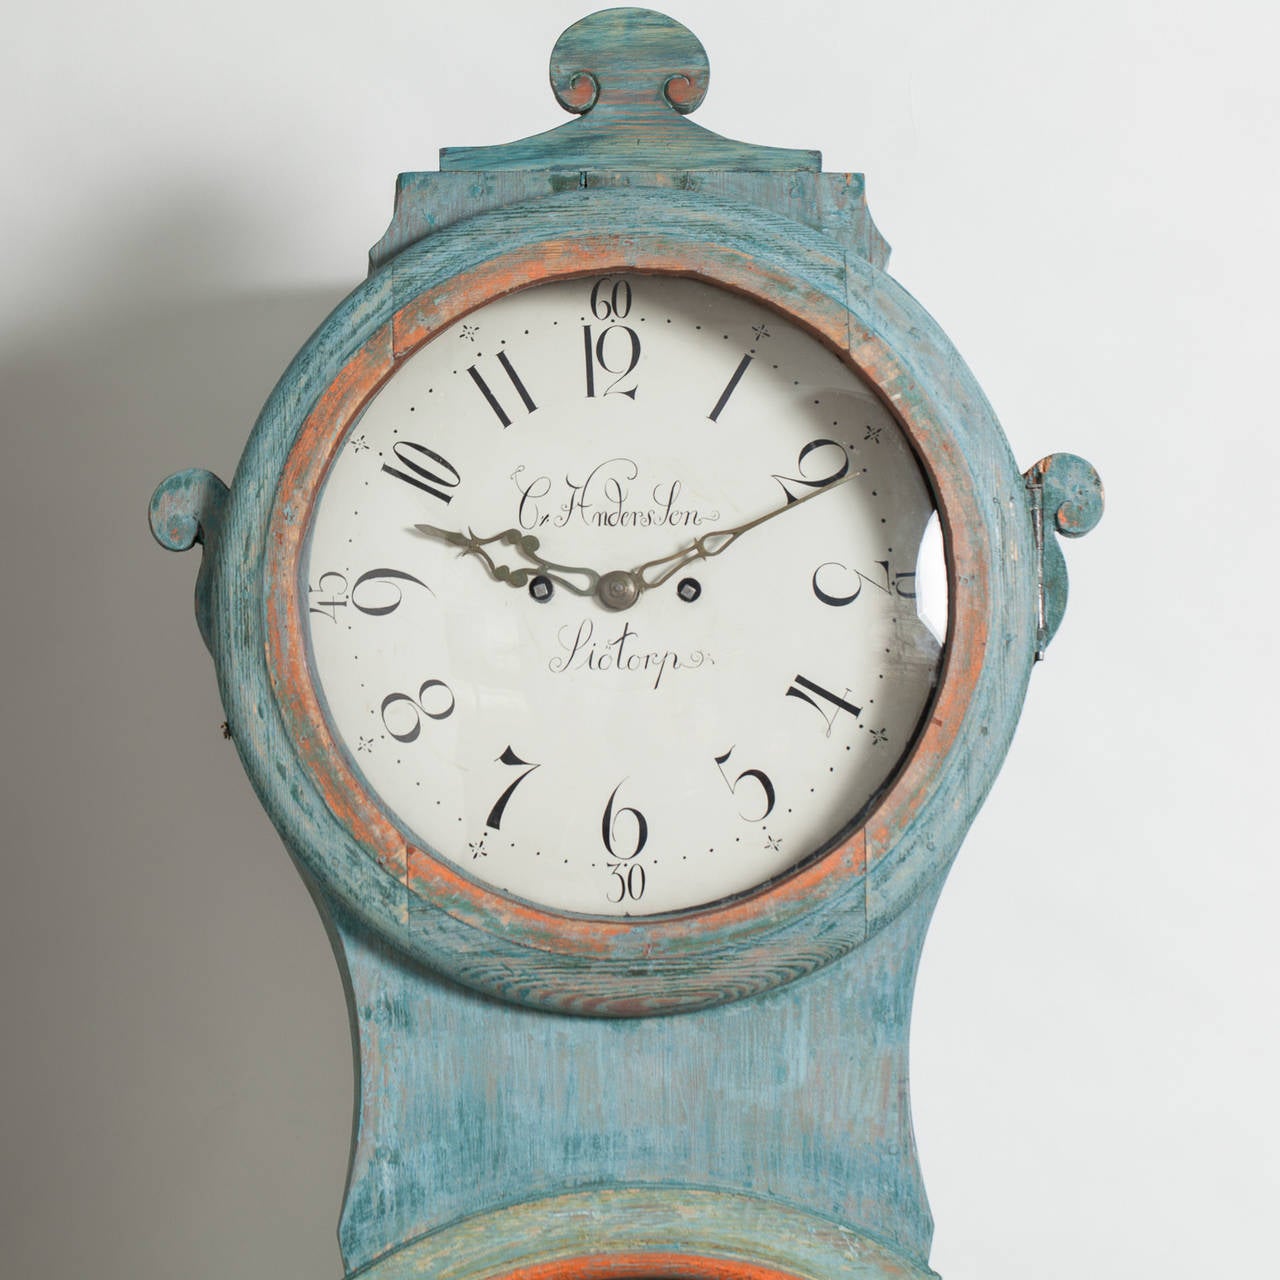 A beautiful Mora clock in the original blue paint surface with details of pale yellow/ gold and coral. The door of the clock has the initials of the owner as well as the date ,1835. The face is signed with the name of the town in which it was made